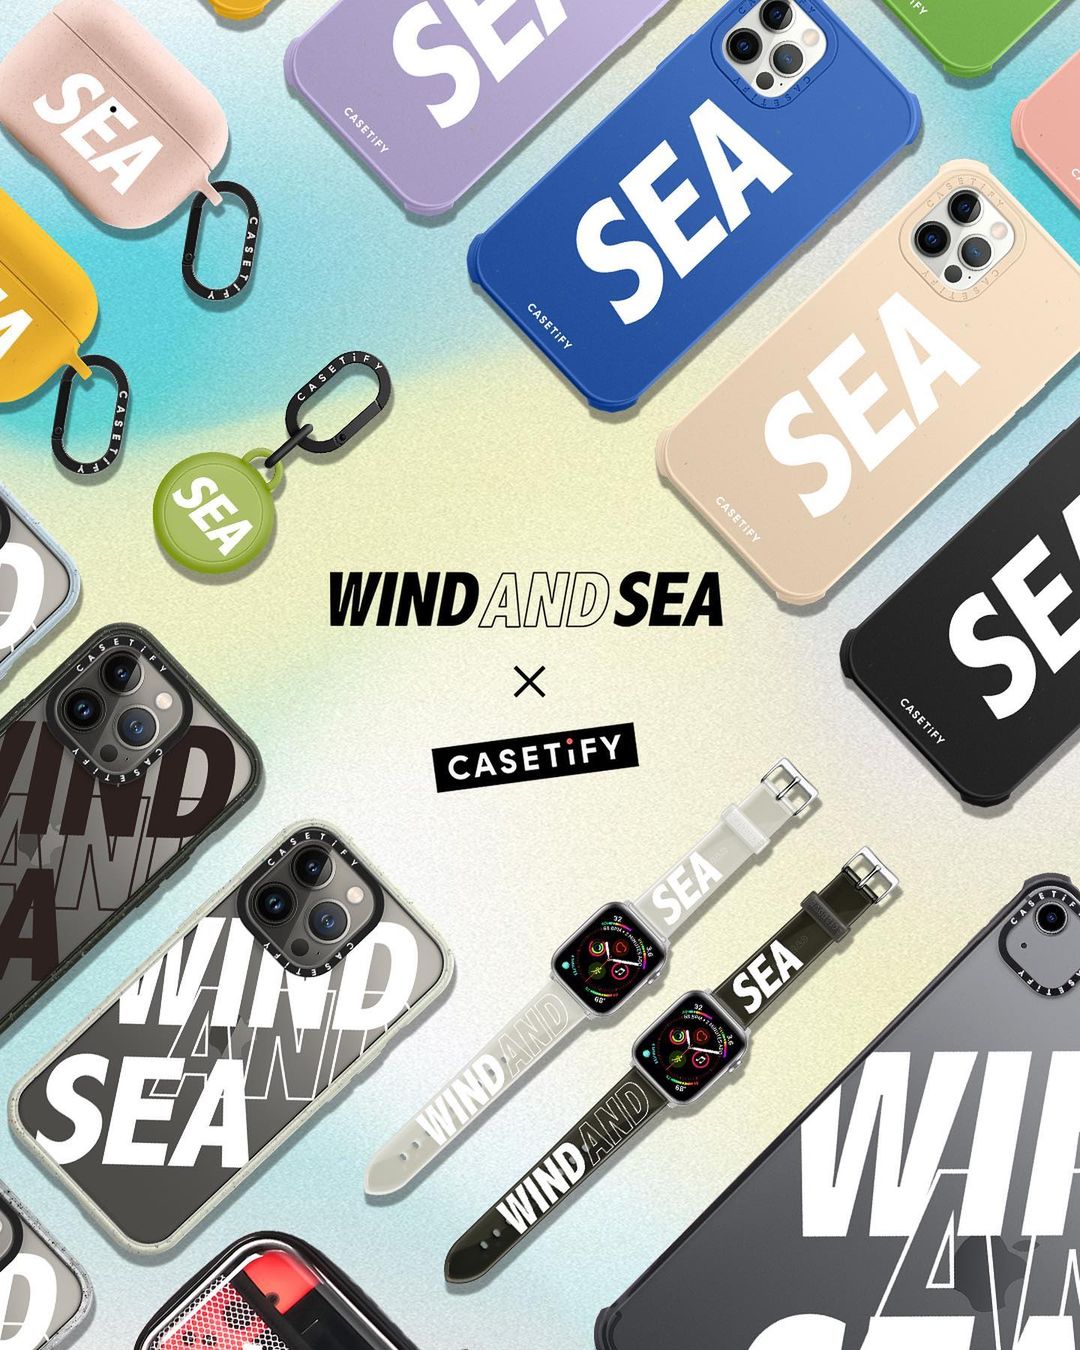 WIND AND SEA CASETIFY